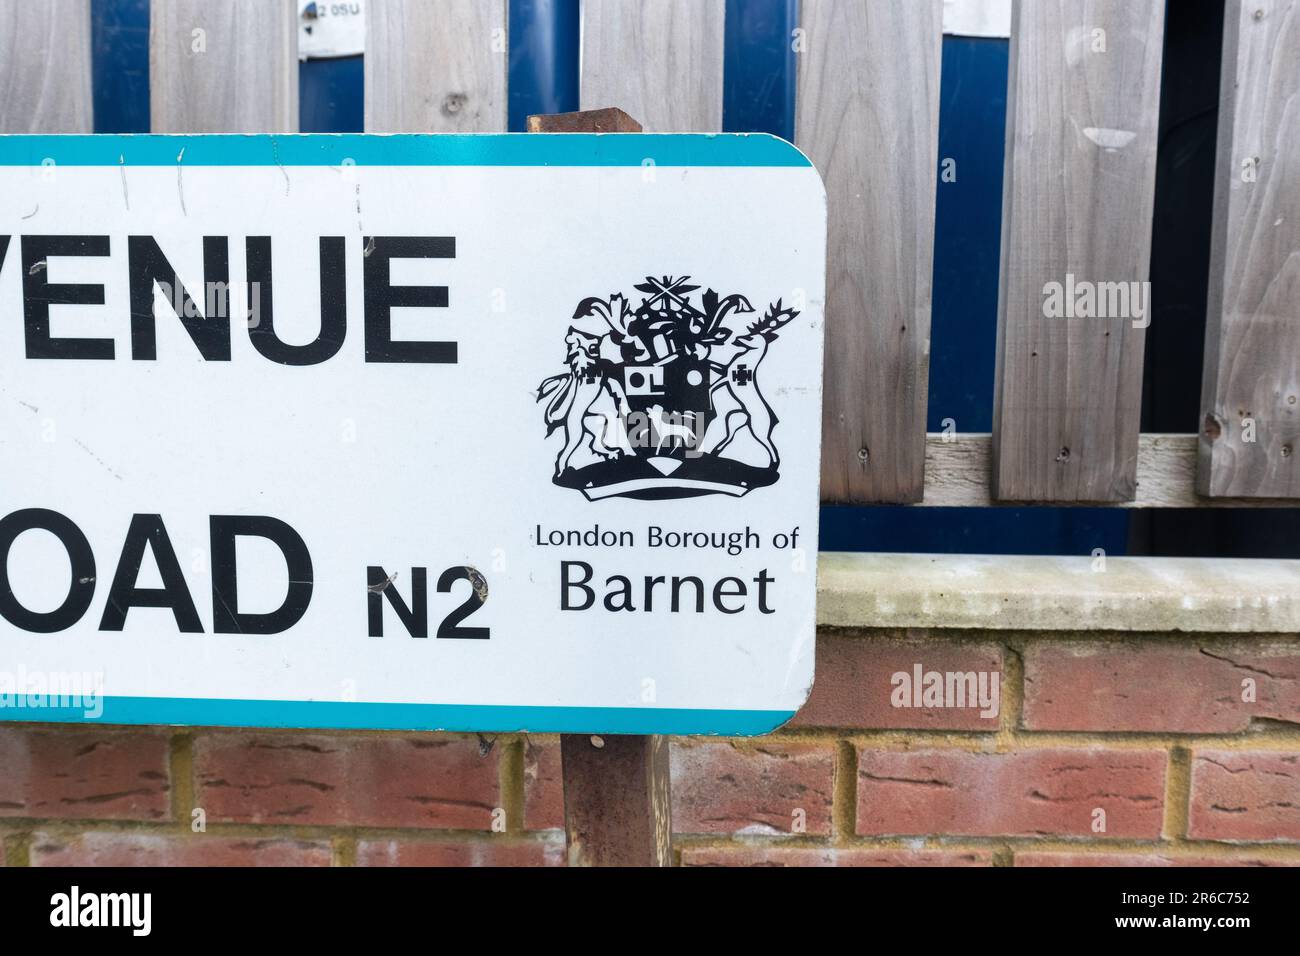 LONDON- MARCH 21, 2023: Residential street sign in London Borough of Barnet N2 Stock Photo